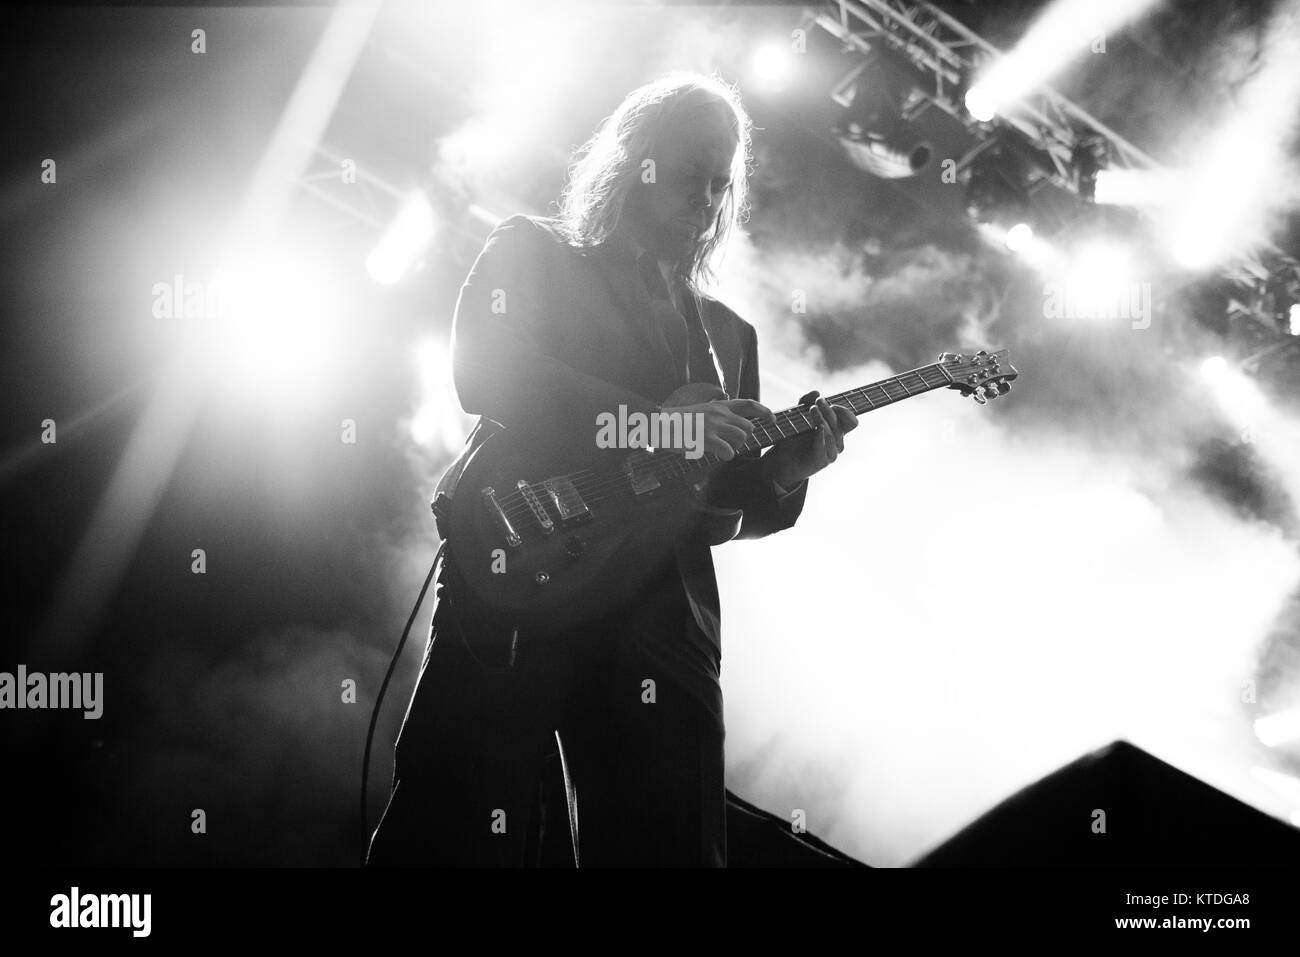 The Faroese doom metal band Hamferð (Hamferd) performs a live concert at the Faroese music festival G! Festival 2014. Here guitarist Theodor Kapnas is pictured live on stage. Faroe Islands, 18.07.2014. Stock Photo